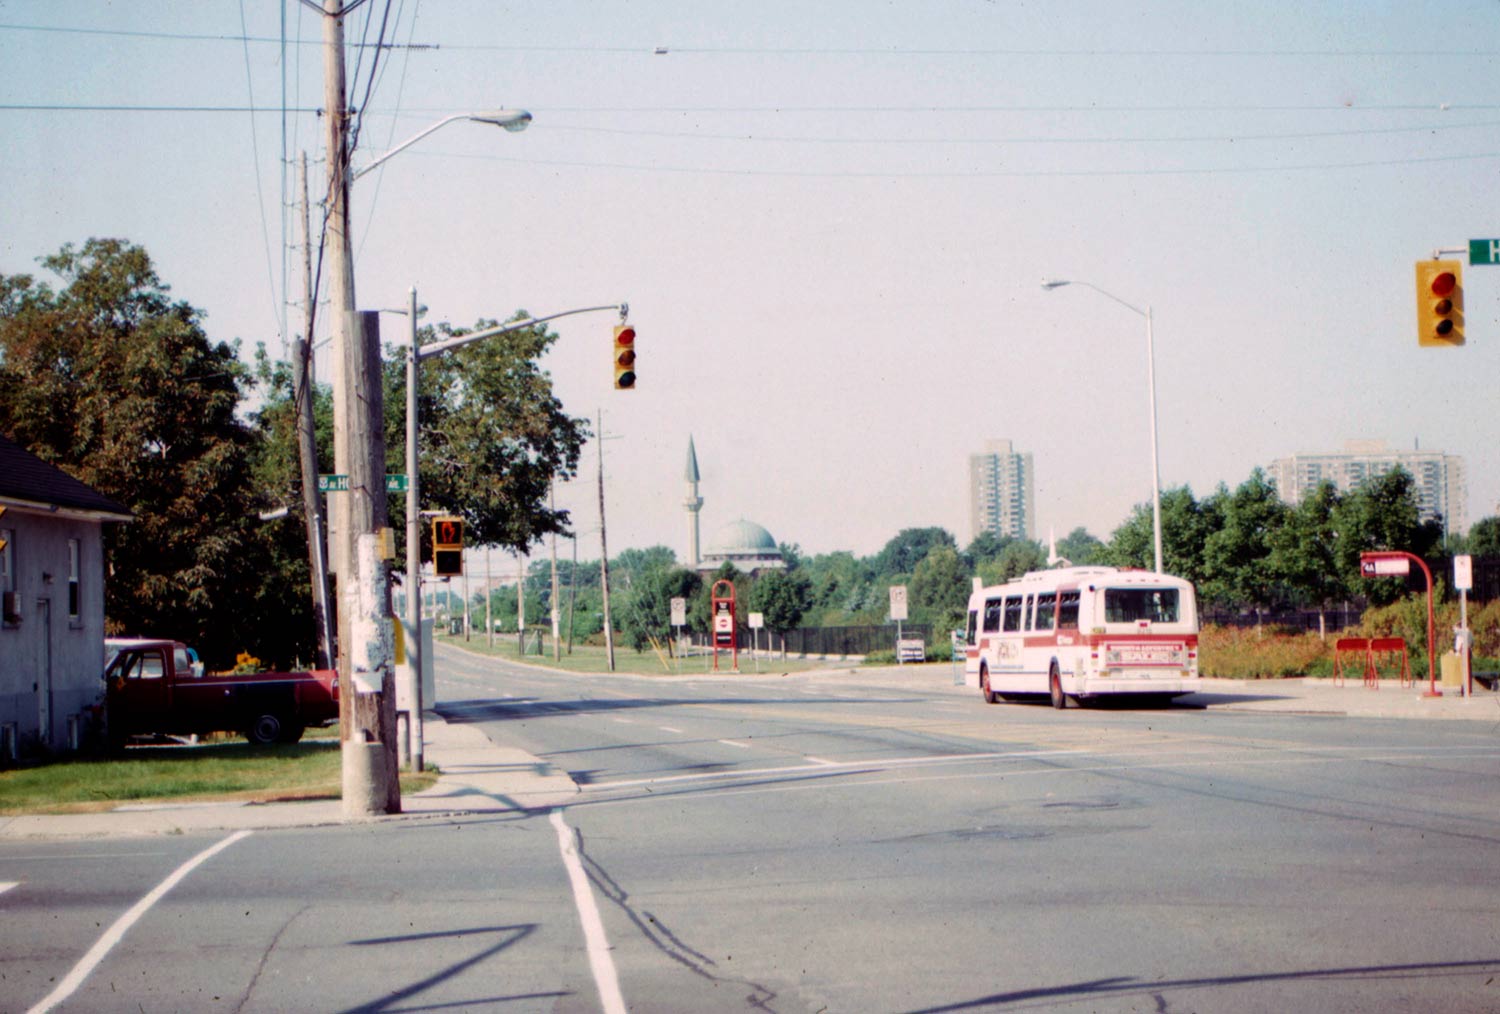 Ottawa Mosque - Distant view of the mosque, showing approach from the east on Scott St.